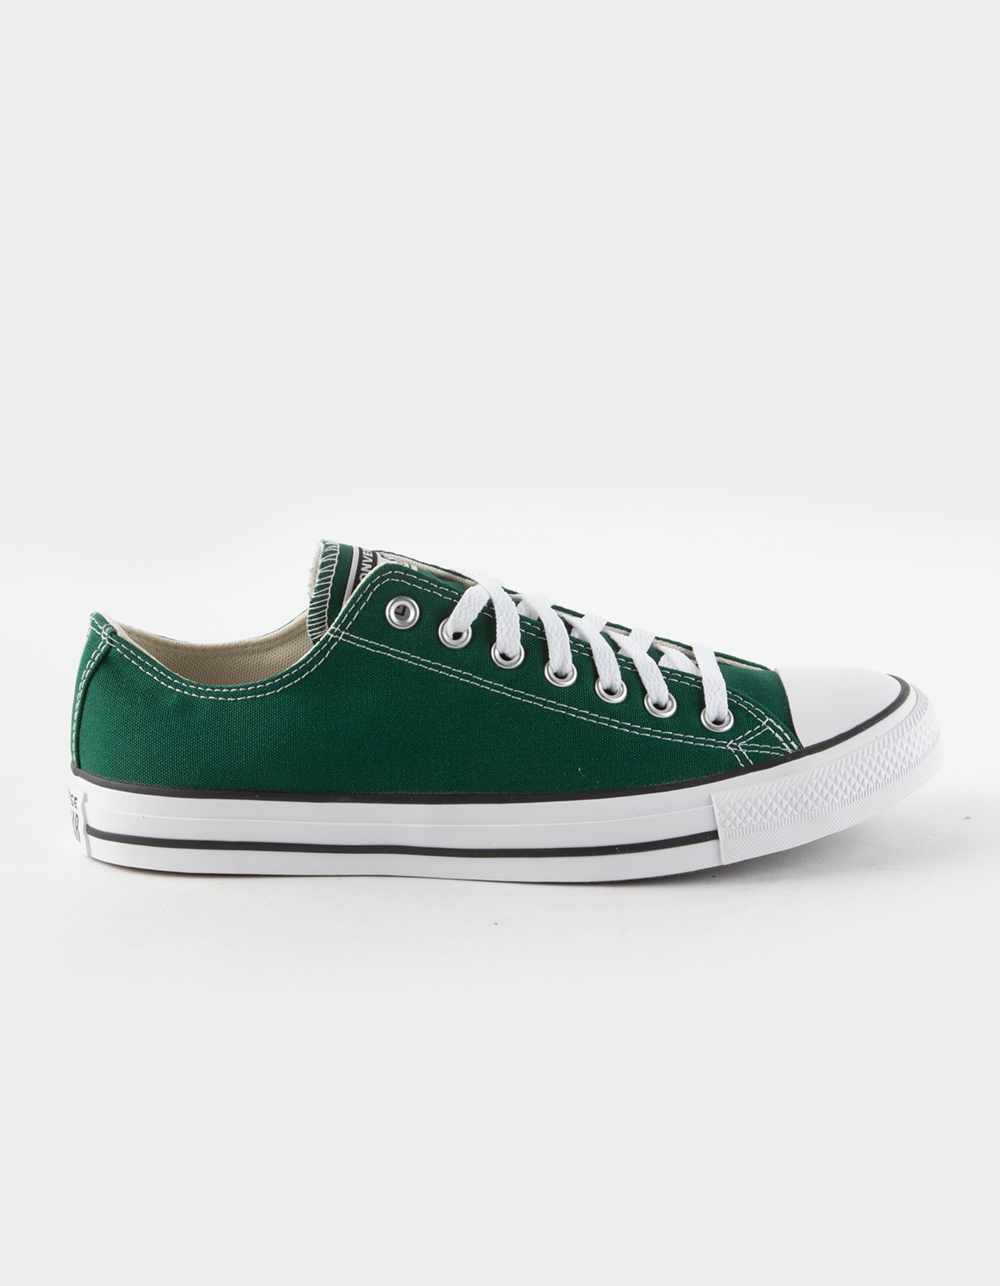 CONVERSE Chuck Taylor All Star Low Top Shoes - CLOVER | Tillys